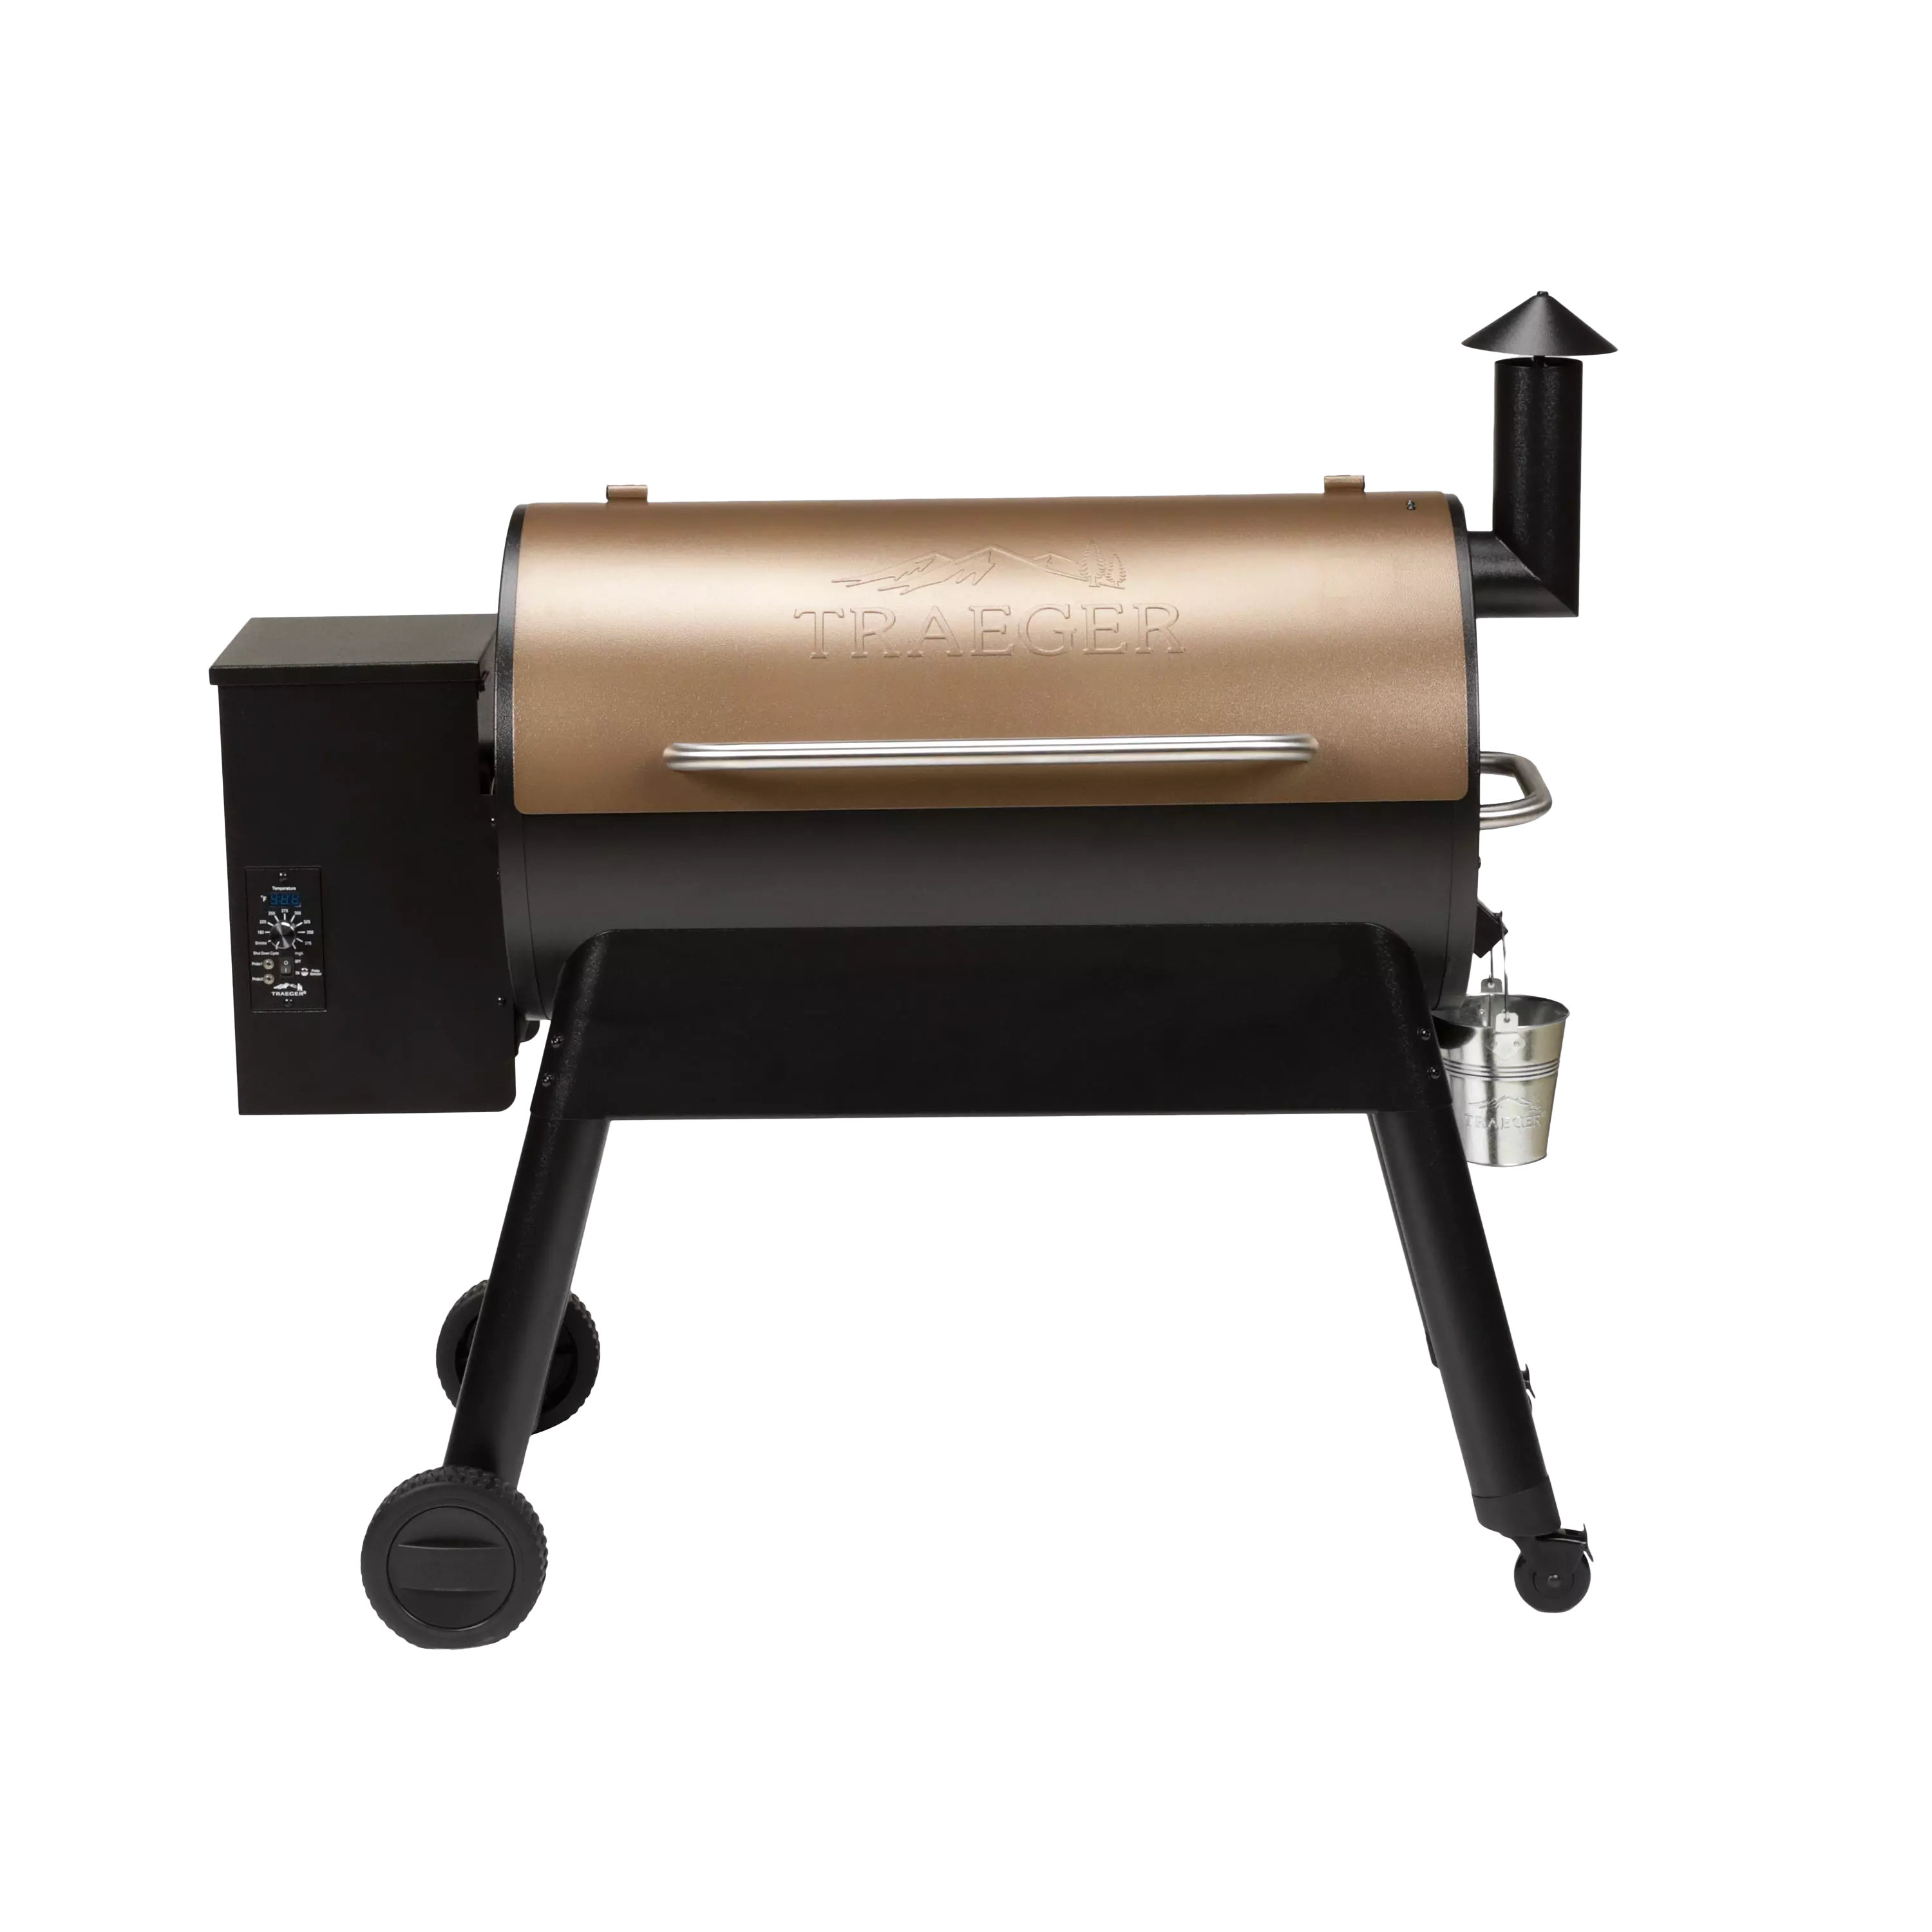 Traeger Grill Pro Series 34 BBQ Pellet Outdoor Cooking Portable 6 In 1 Barbeque 